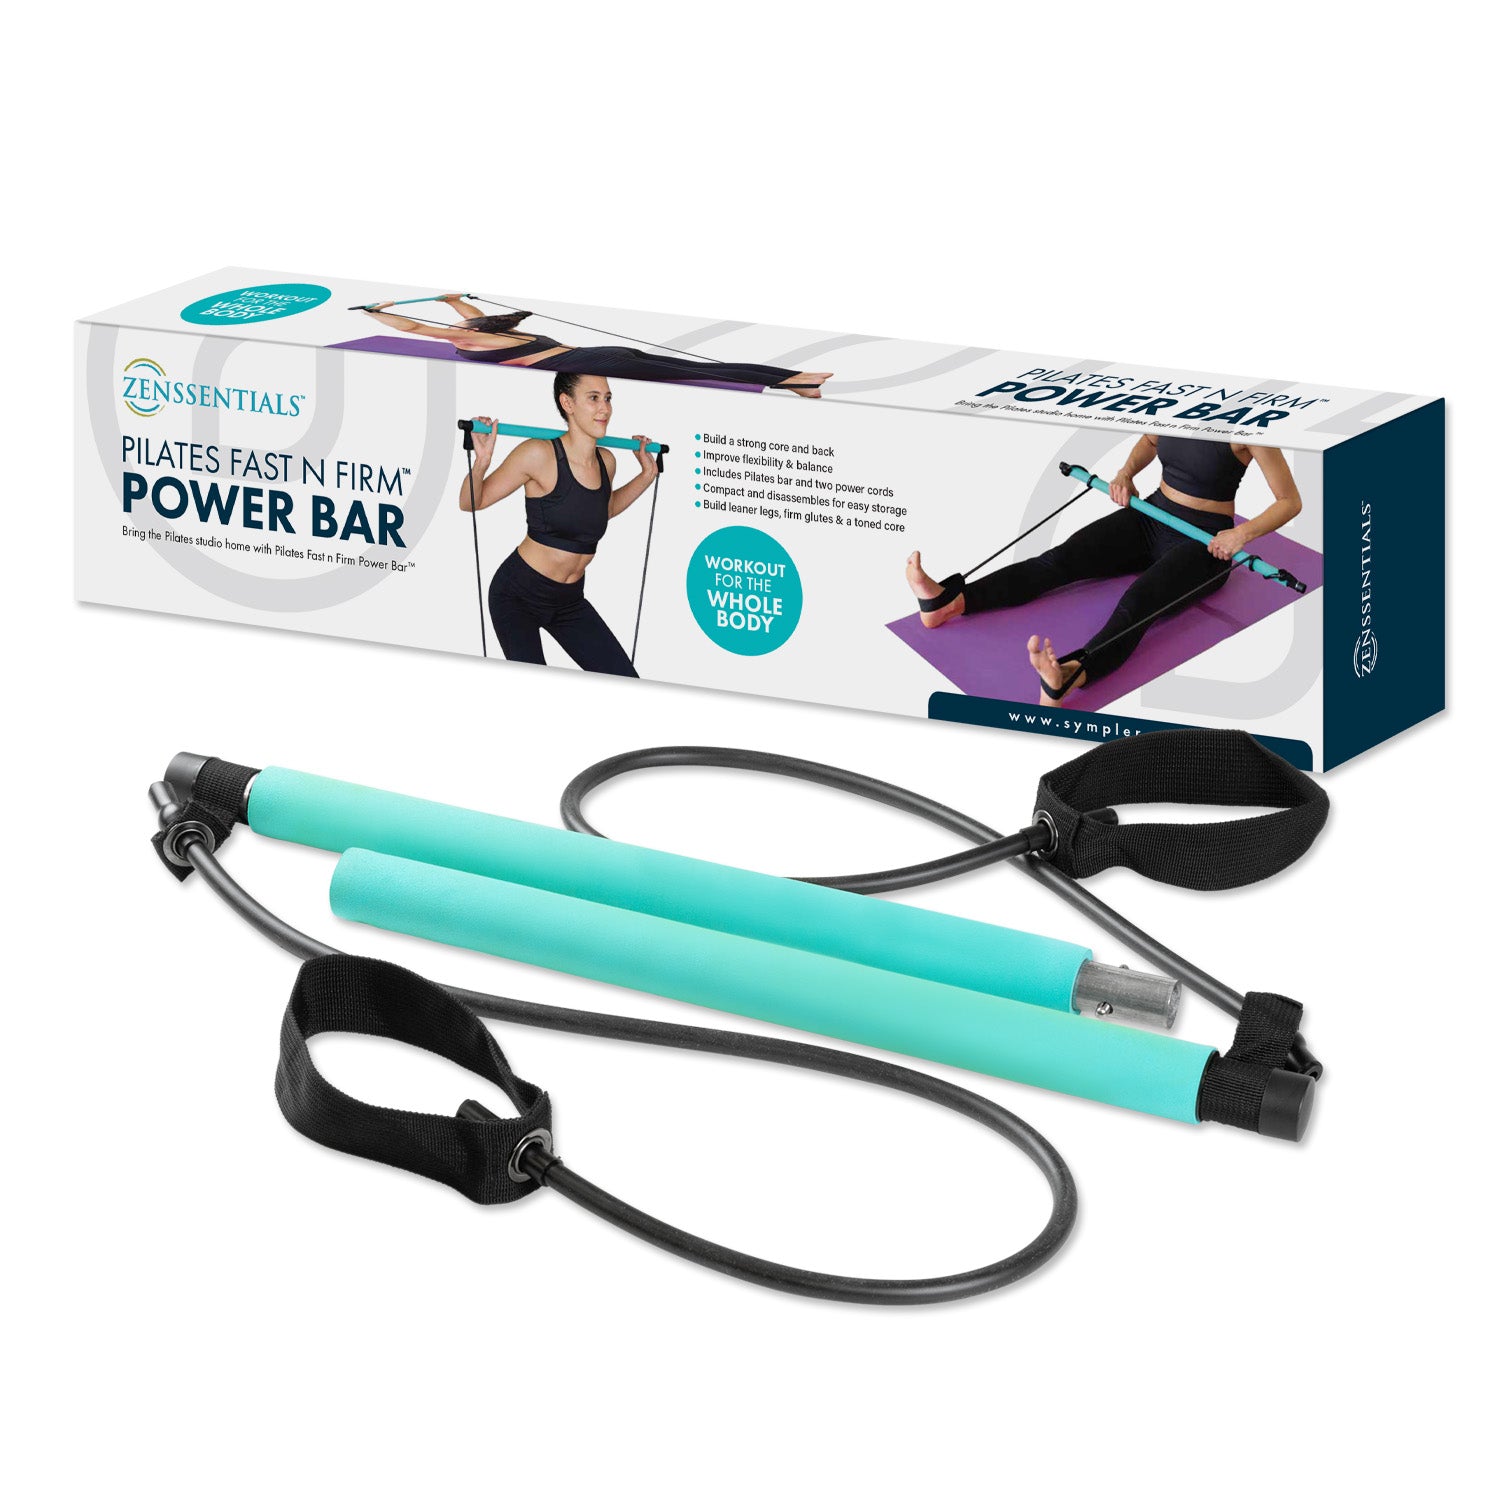 I'm Unlimited® Pilates Bar Kit & Video, 6 to 12 Resistance Bands & Waist